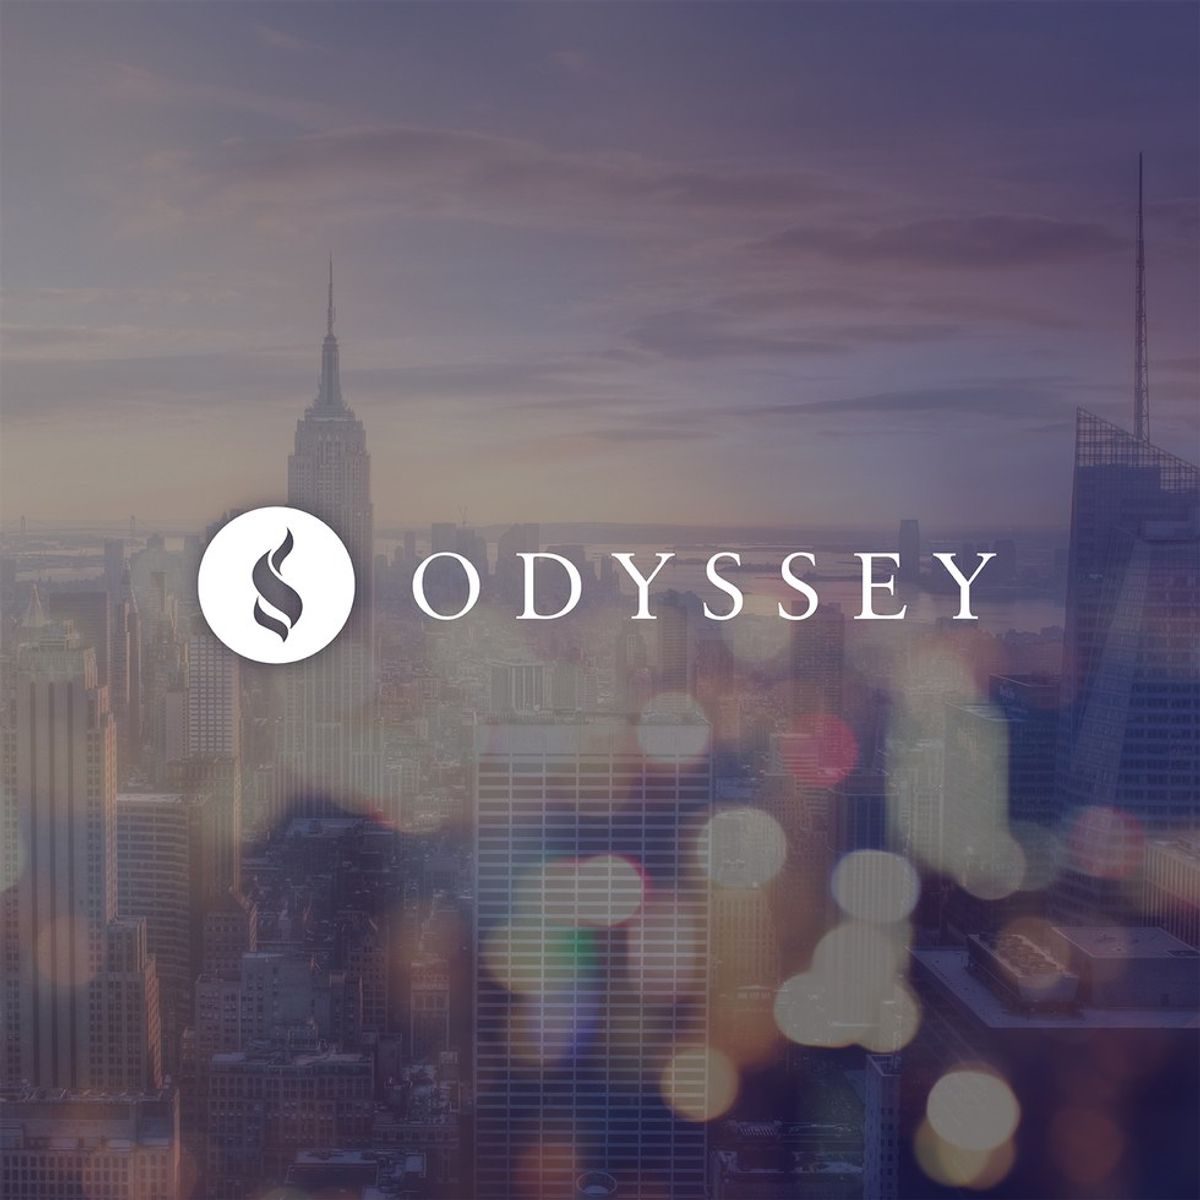 A Farewell To Odyssey